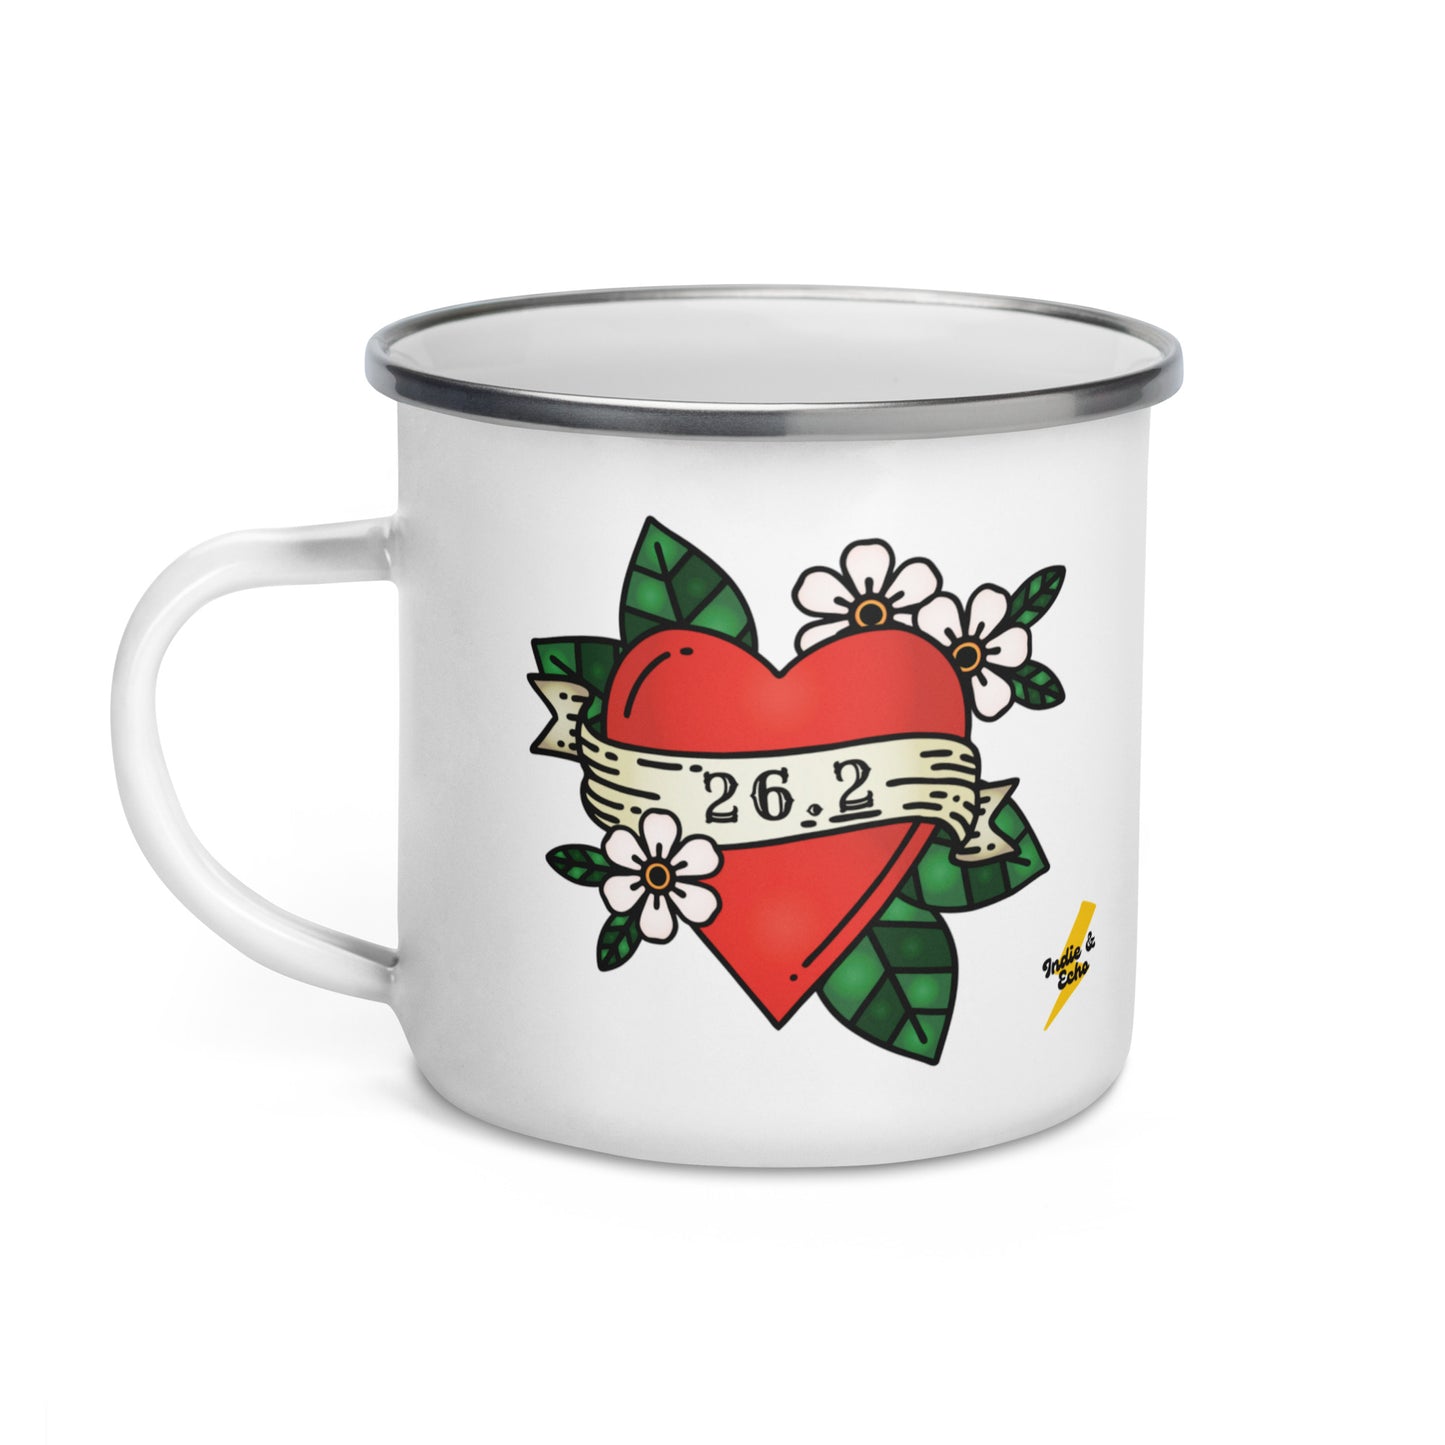 white enamel mug with a love heart and flower traditional tattoo design, with 26.2 marathon distance in a scroll across the front